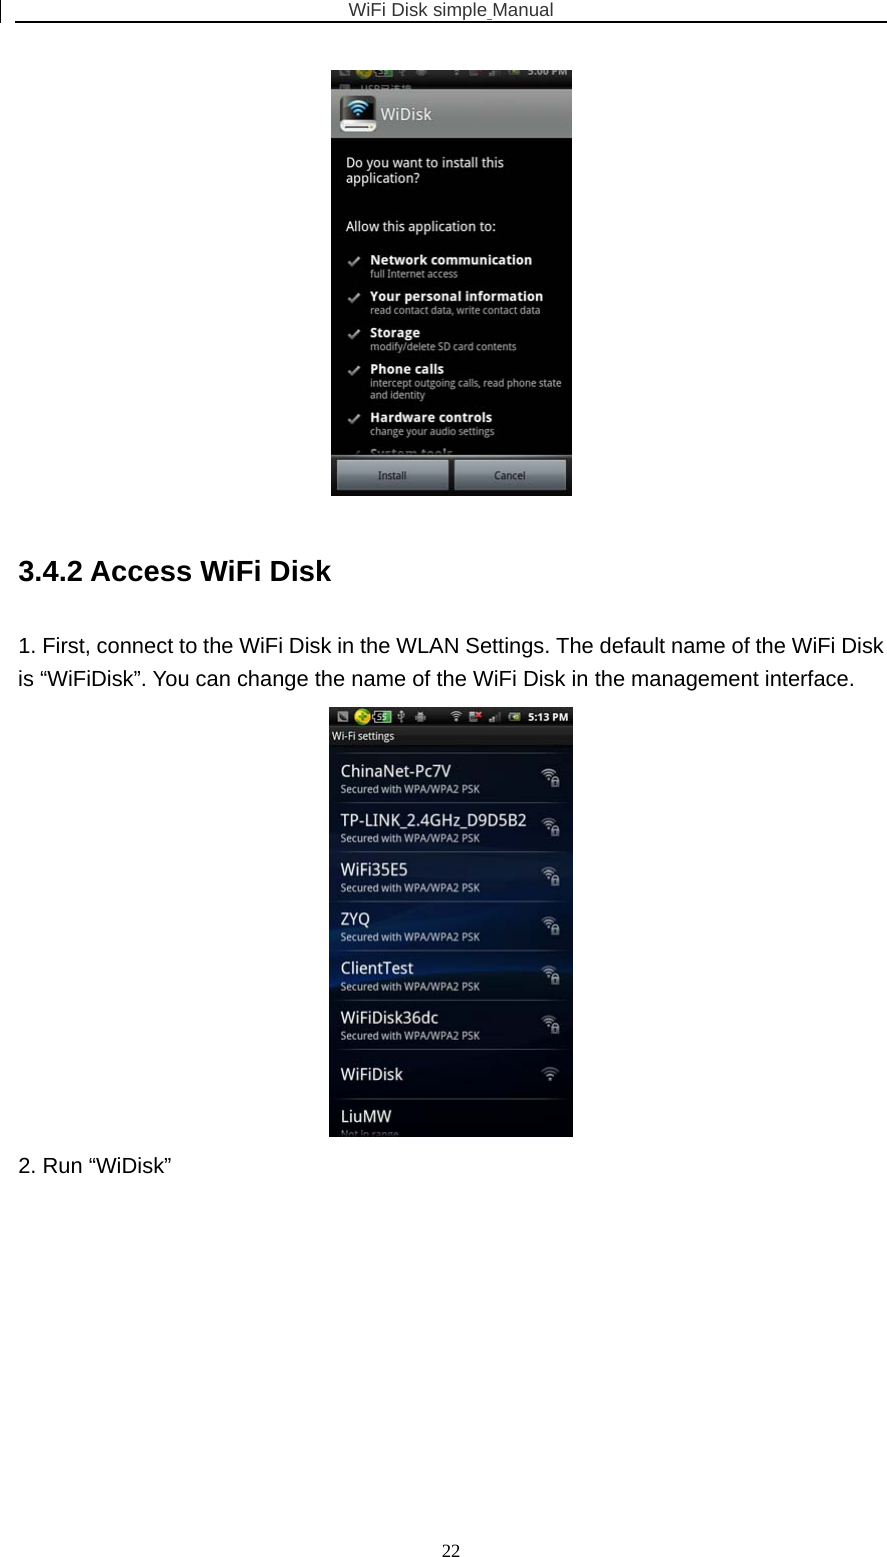 WiFi Disk simple Manual  22 3.4.2 Access WiFi Disk 1. First, connect to the WiFi Disk in the WLAN Settings. The default name of the WiFi Disk is “WiFiDisk”. You can change the name of the WiFi Disk in the management interface.  2. Run “WiDisk” 